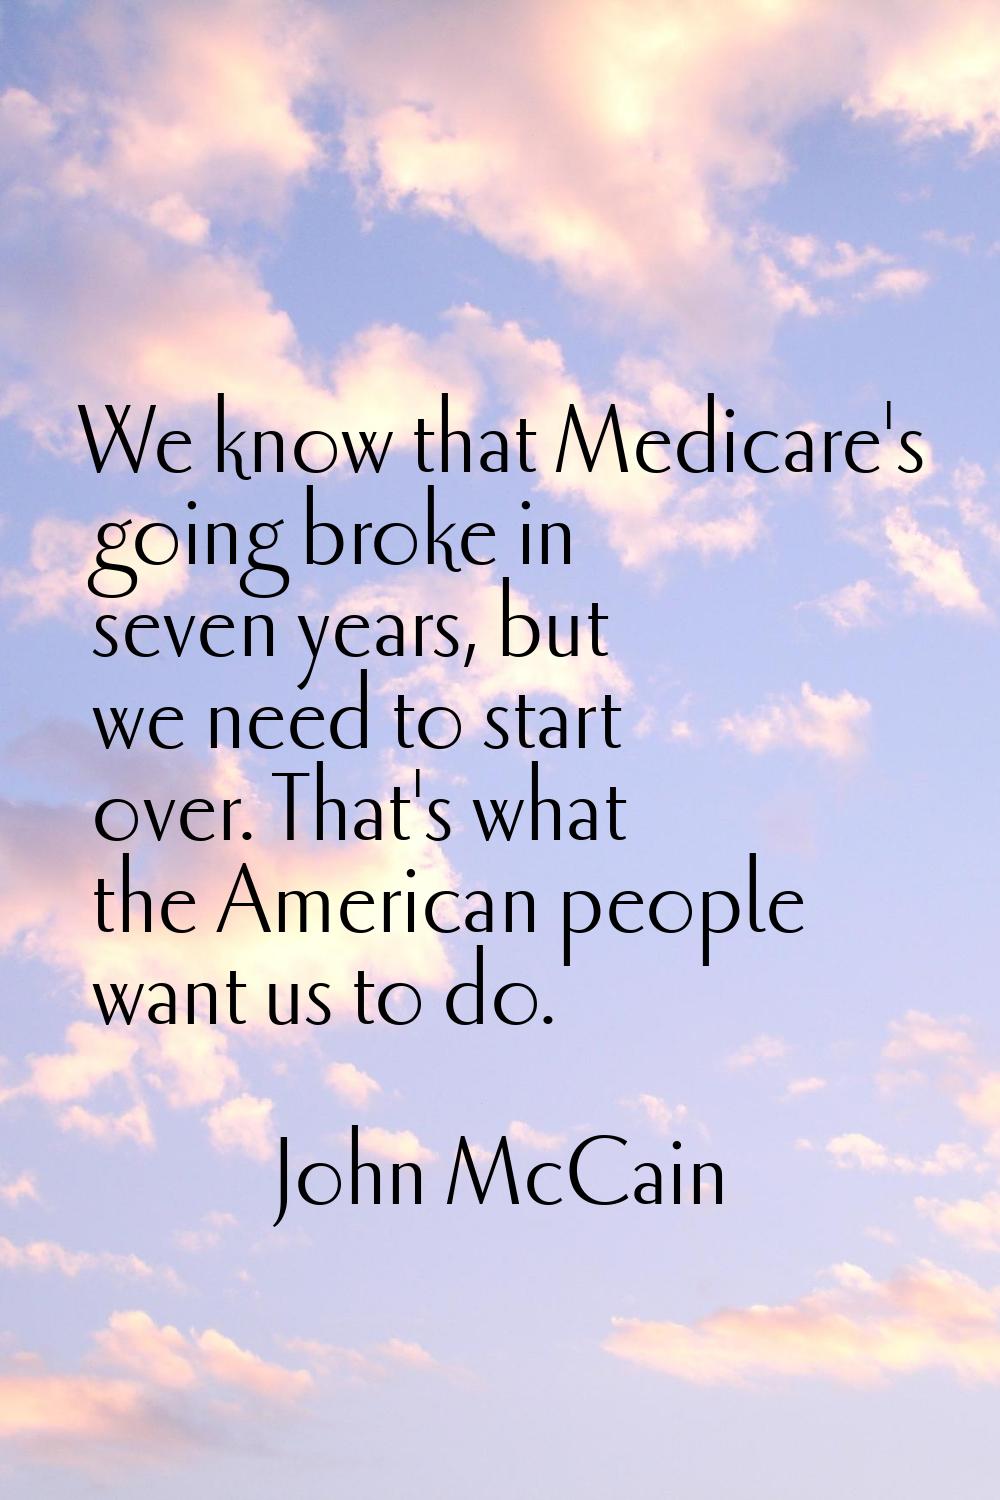 We know that Medicare's going broke in seven years, but we need to start over. That's what the Amer